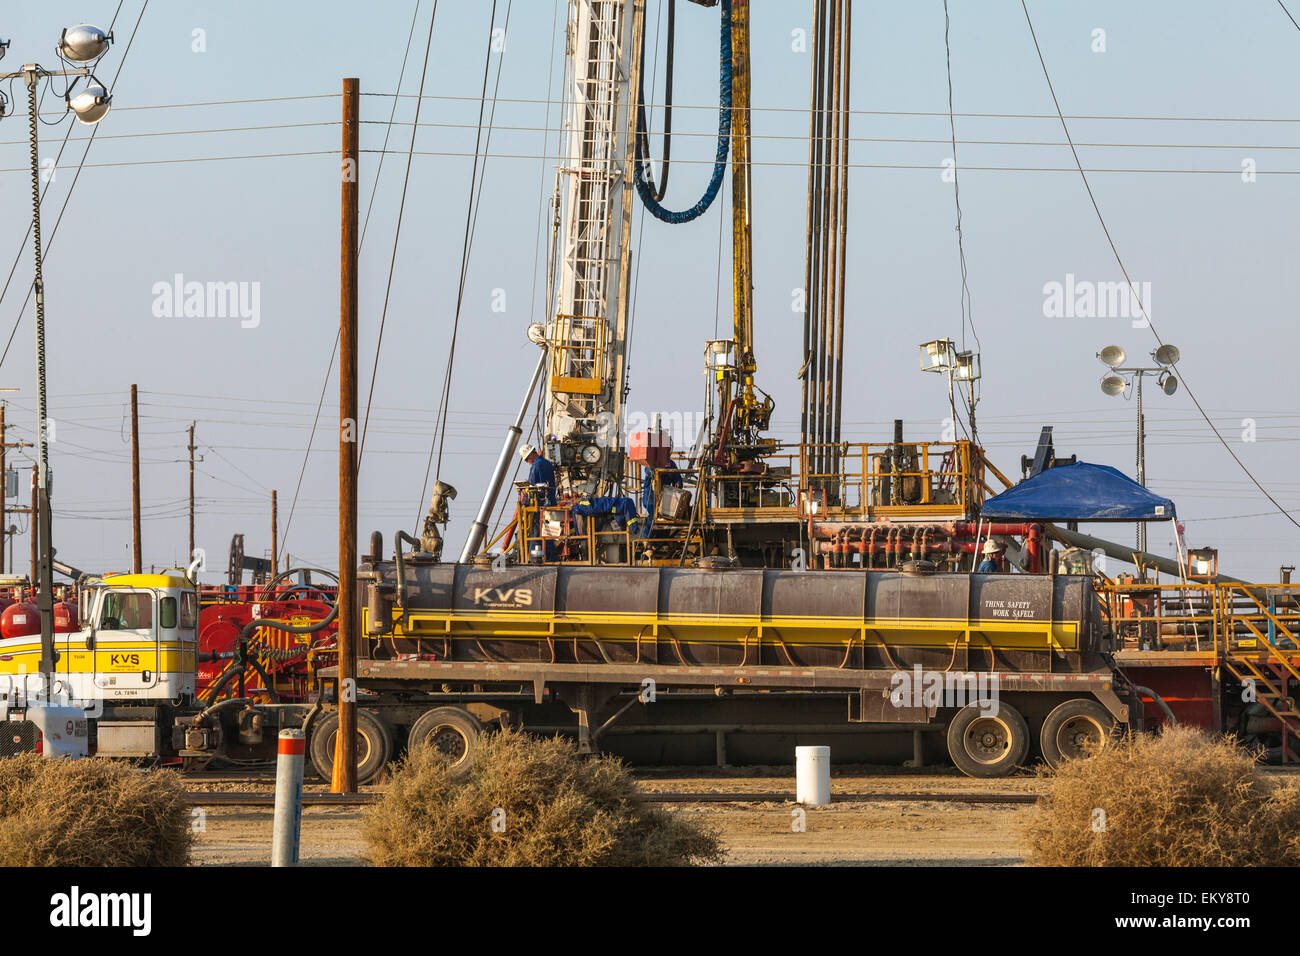 Well stimulation activity on oil well. Lost Hills Oil Field and hydraulic fracking site, Monterey Shale. Kern County, California Stock Photo